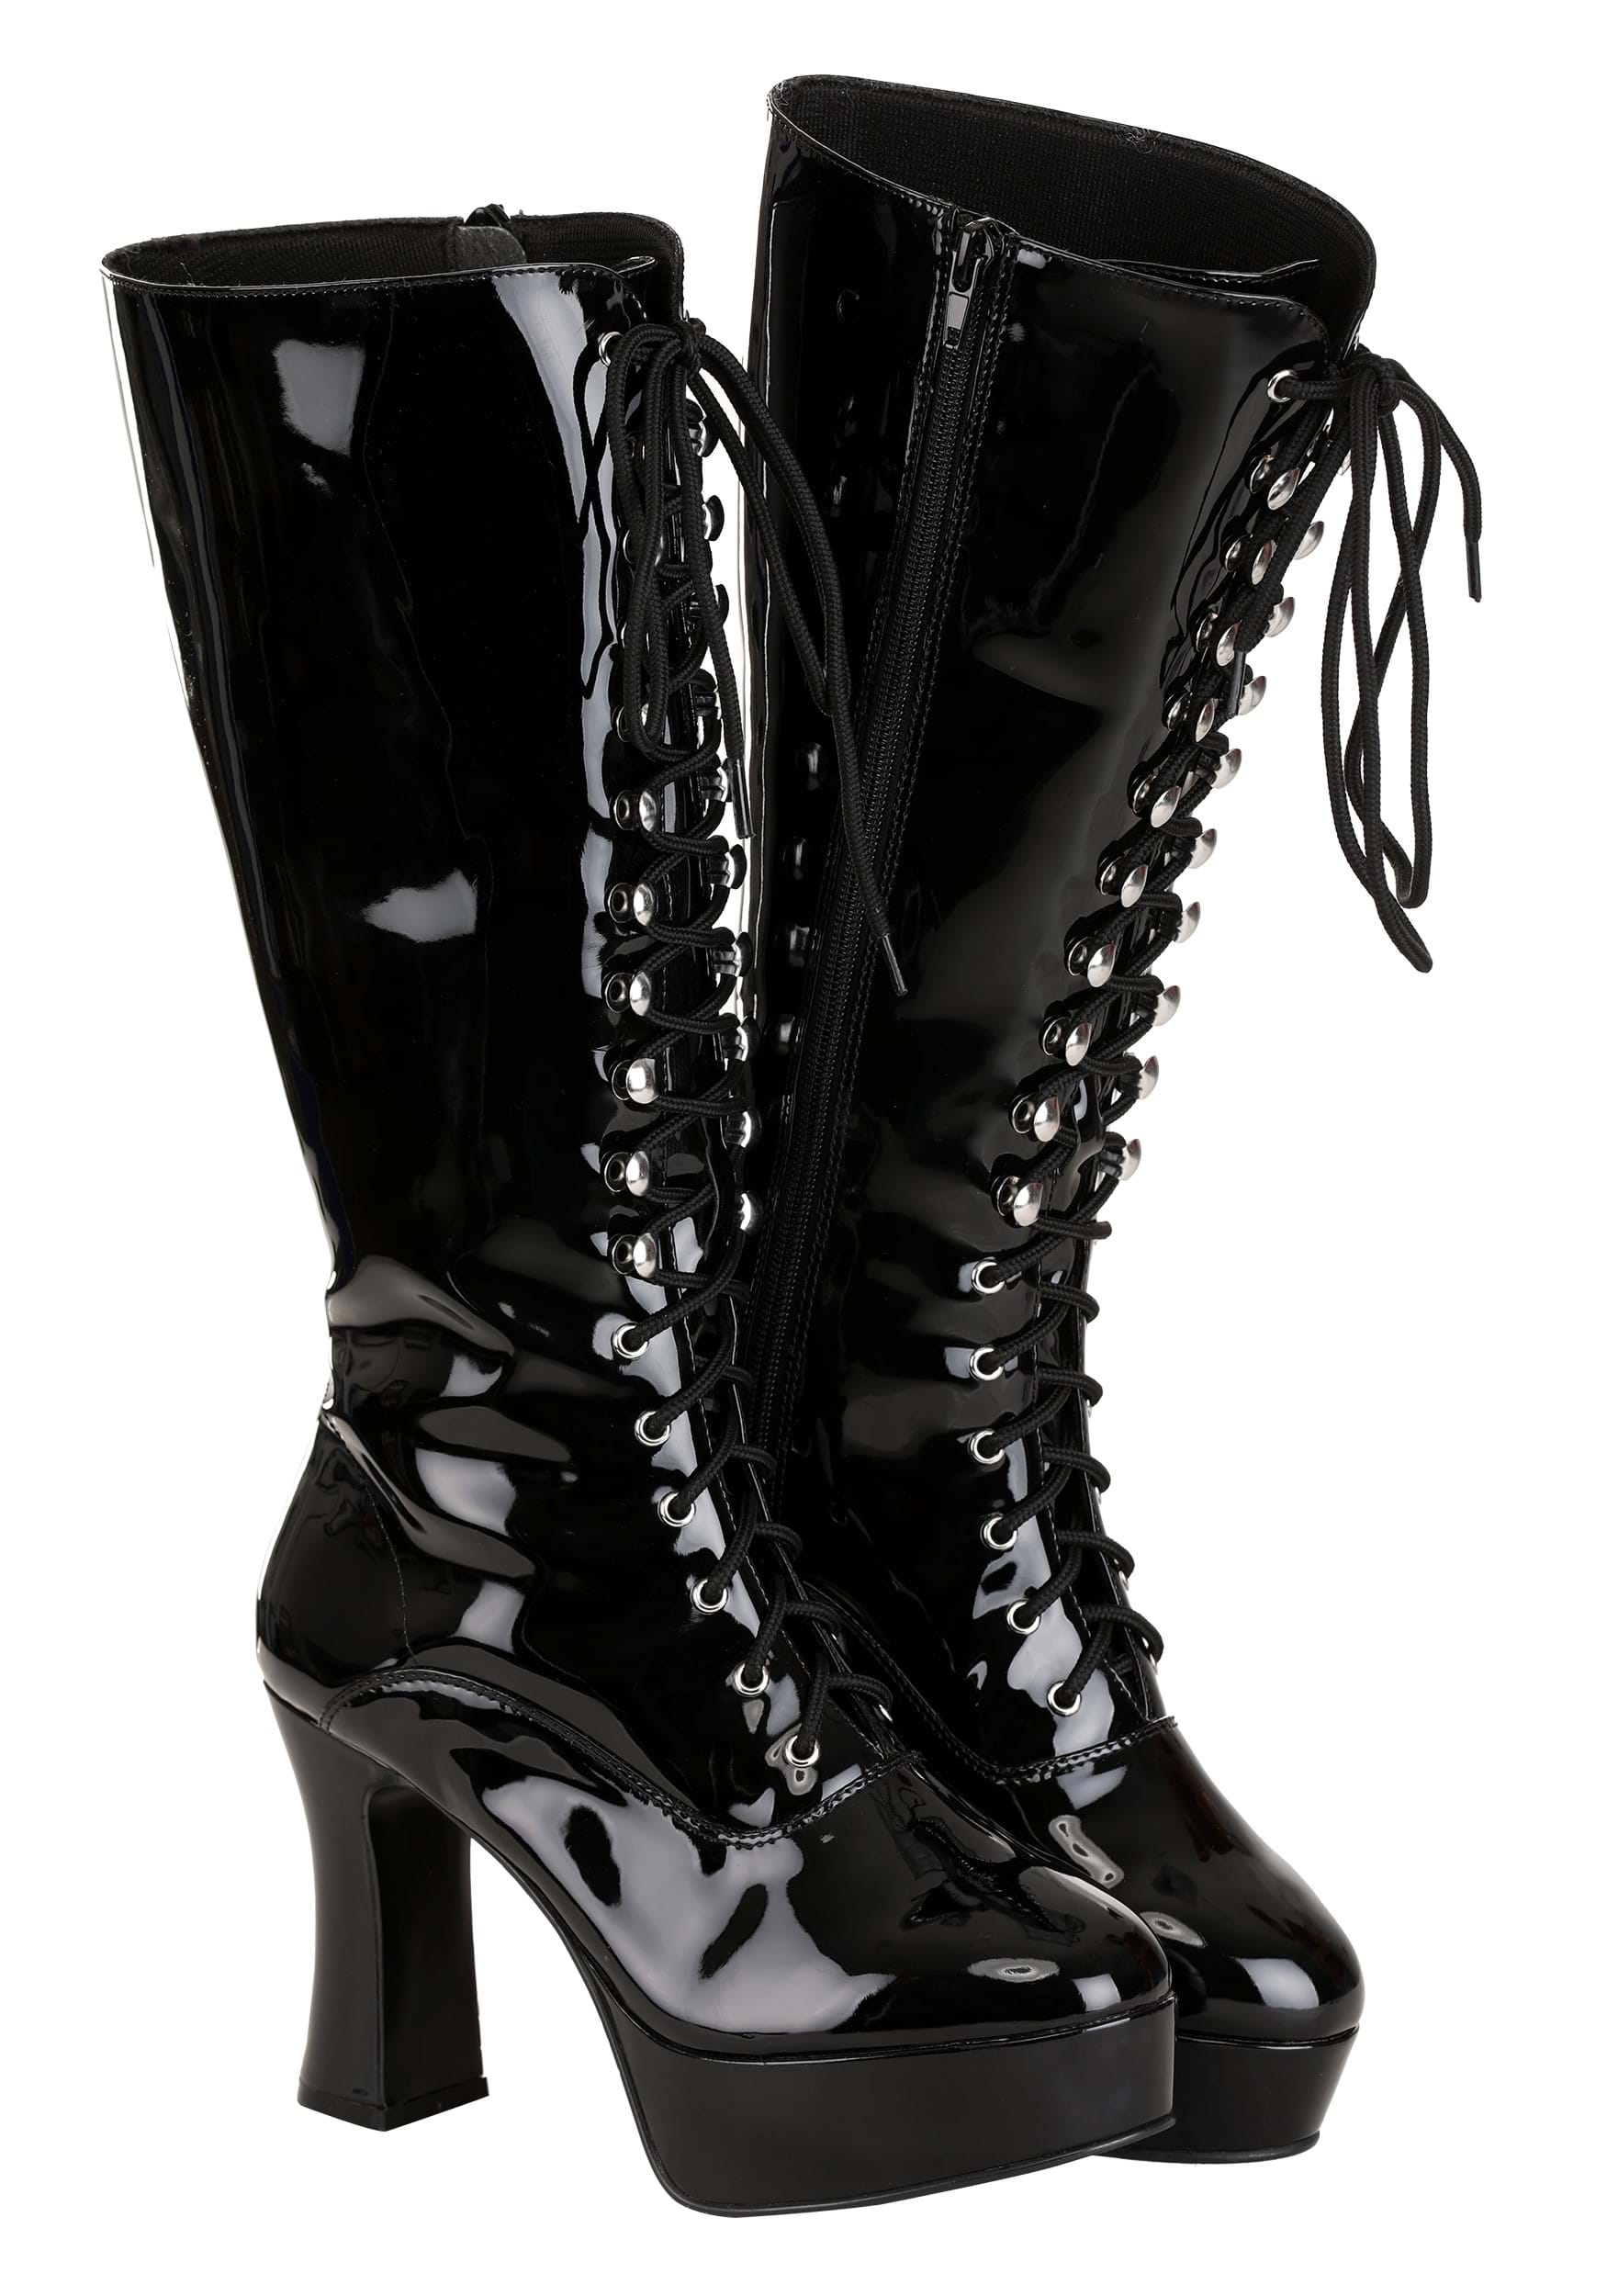 Image of Adult Sexy Black Faux Leather Knee High Boots ID FUN3412AD-6